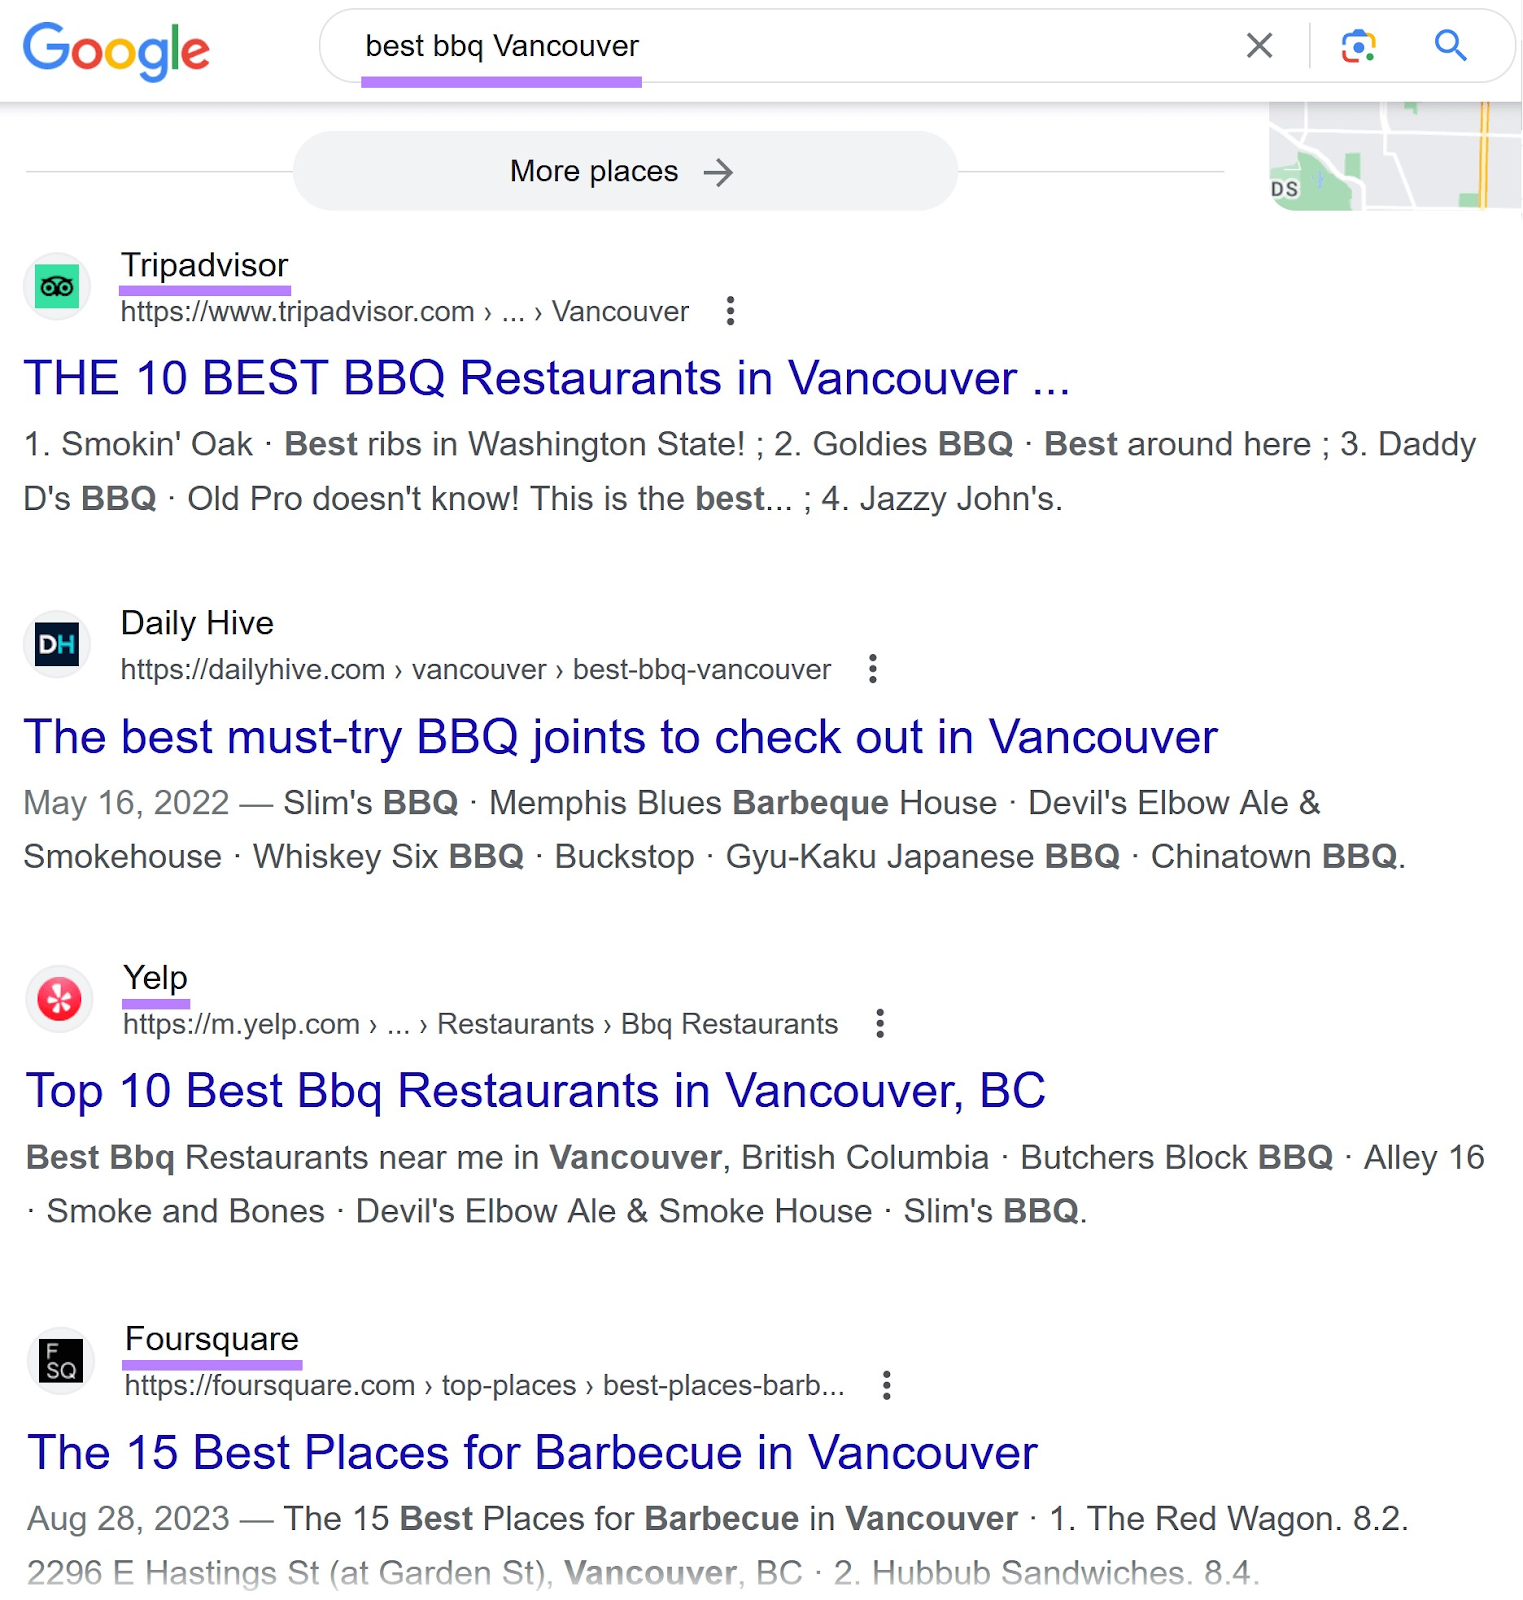 search results page for “best bbq vancouver”